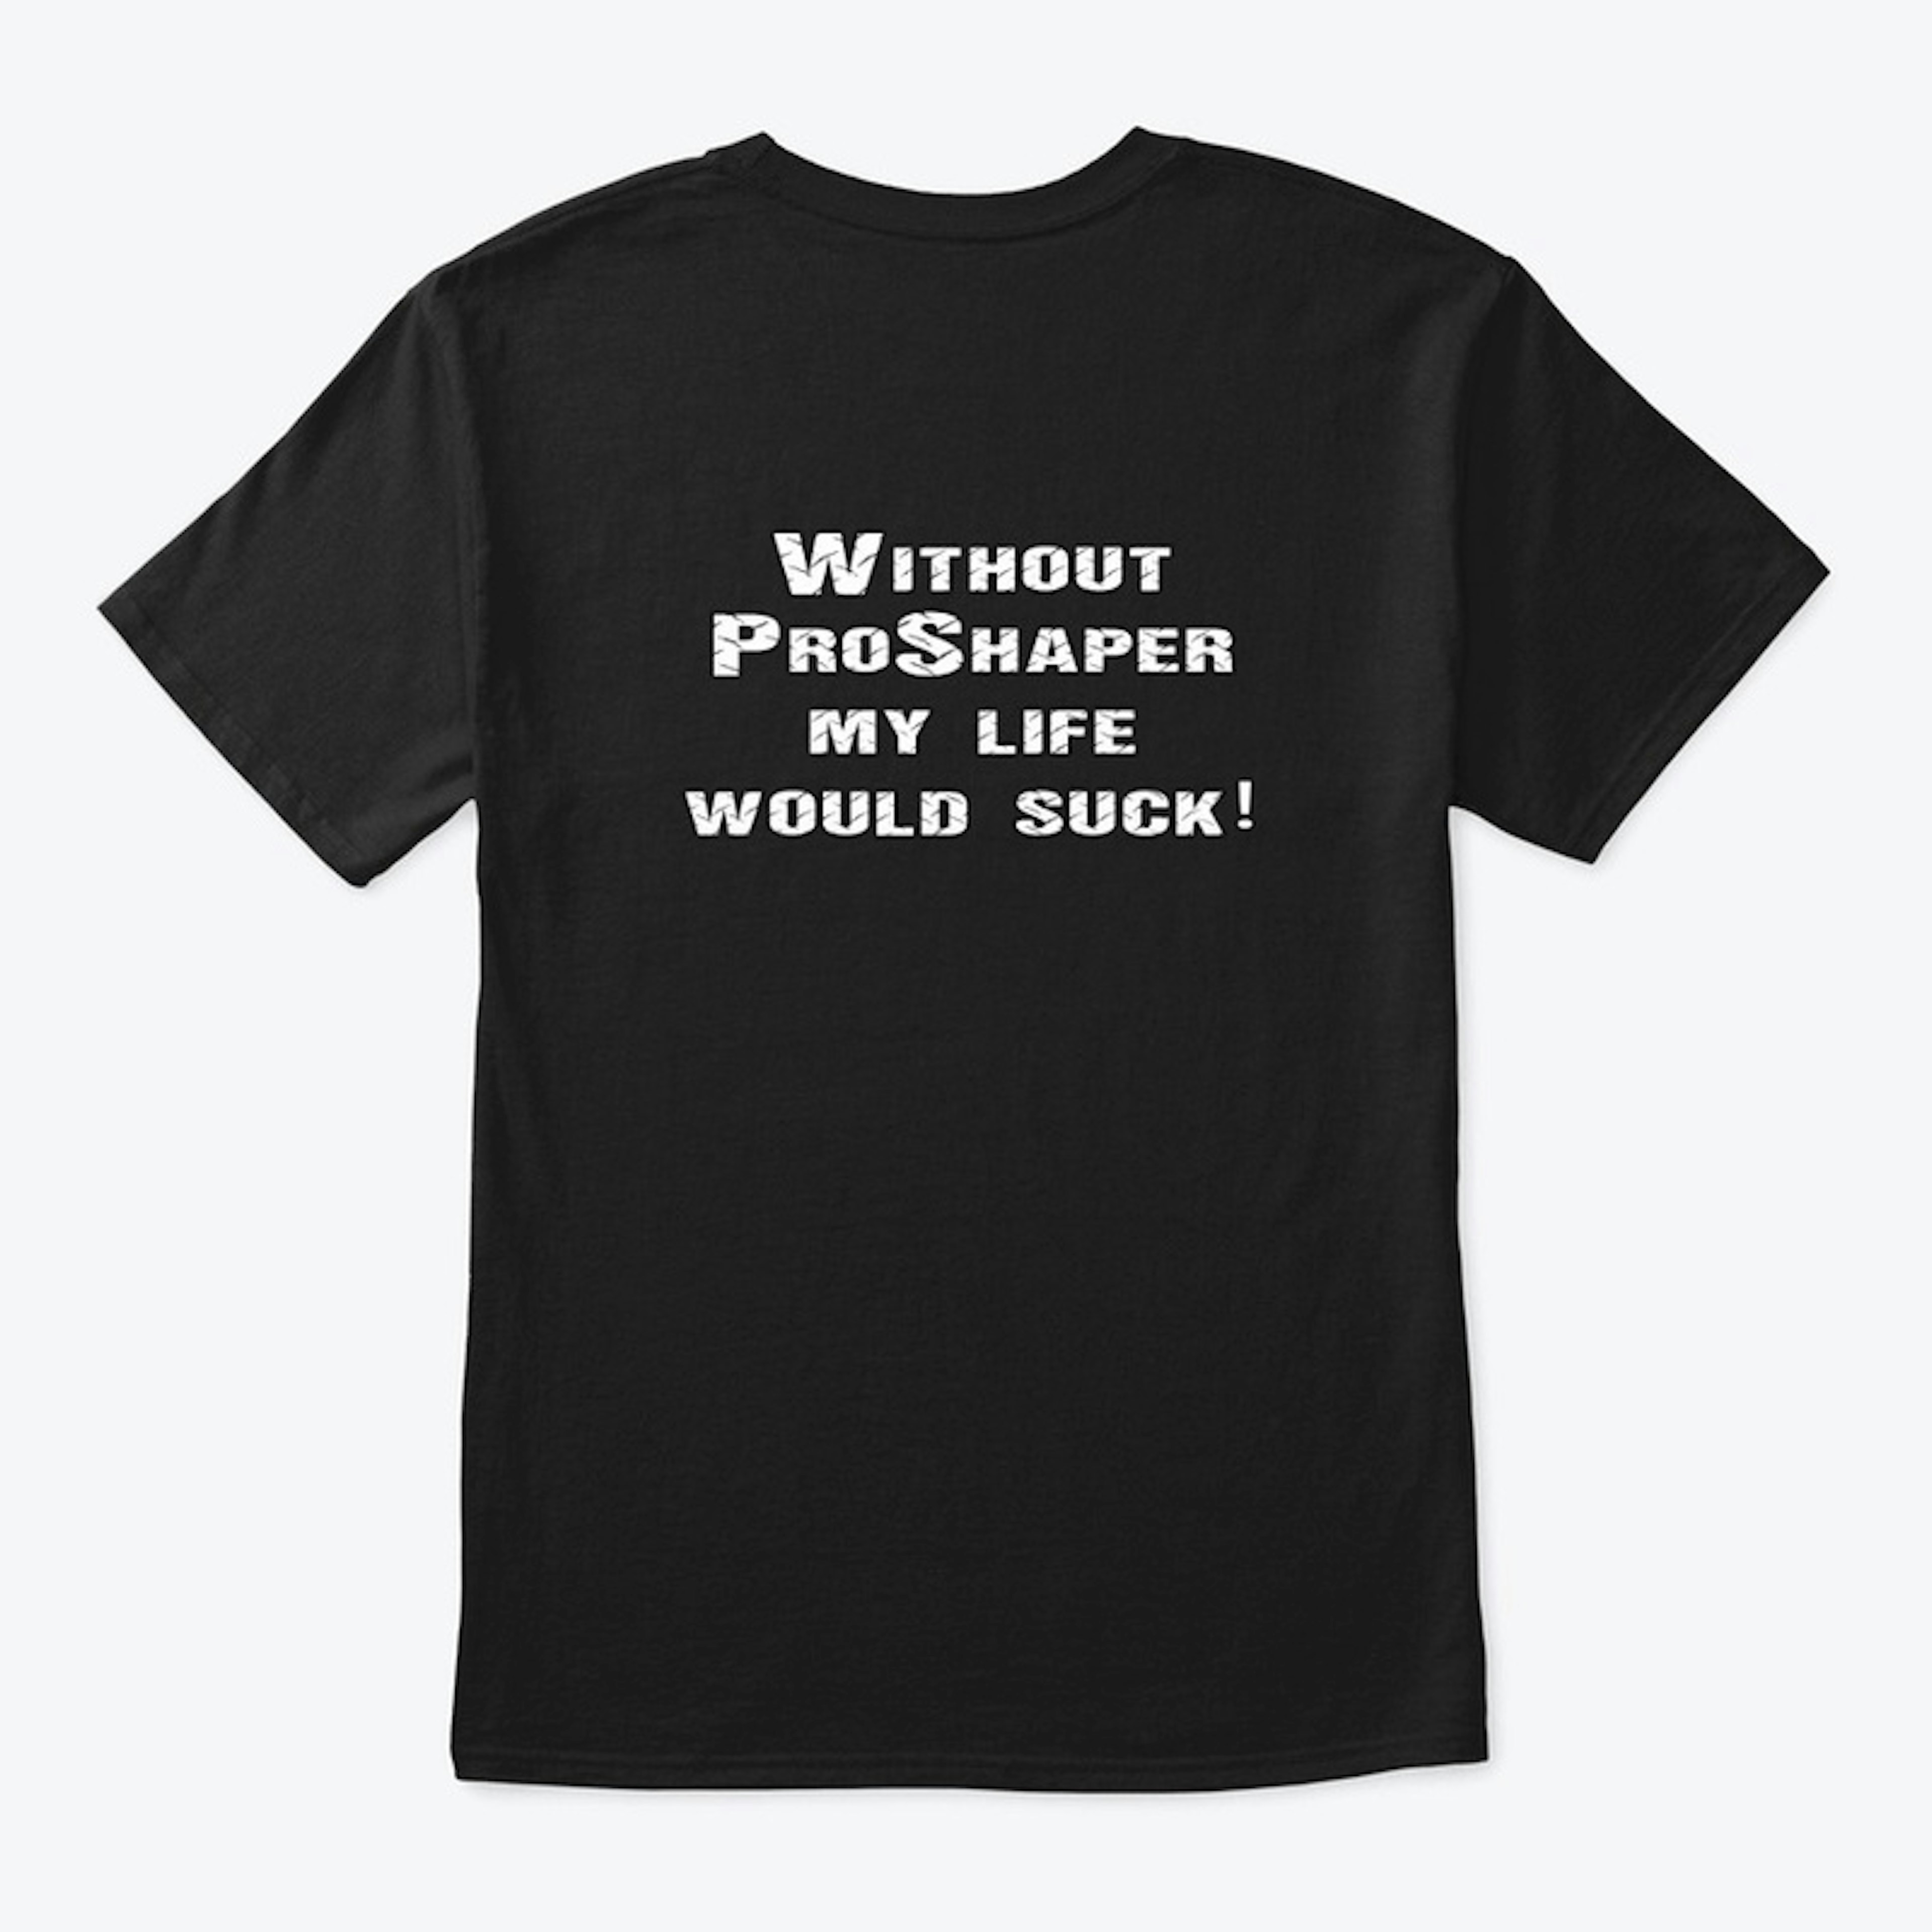 Without ProShaper My Life Would Suck!